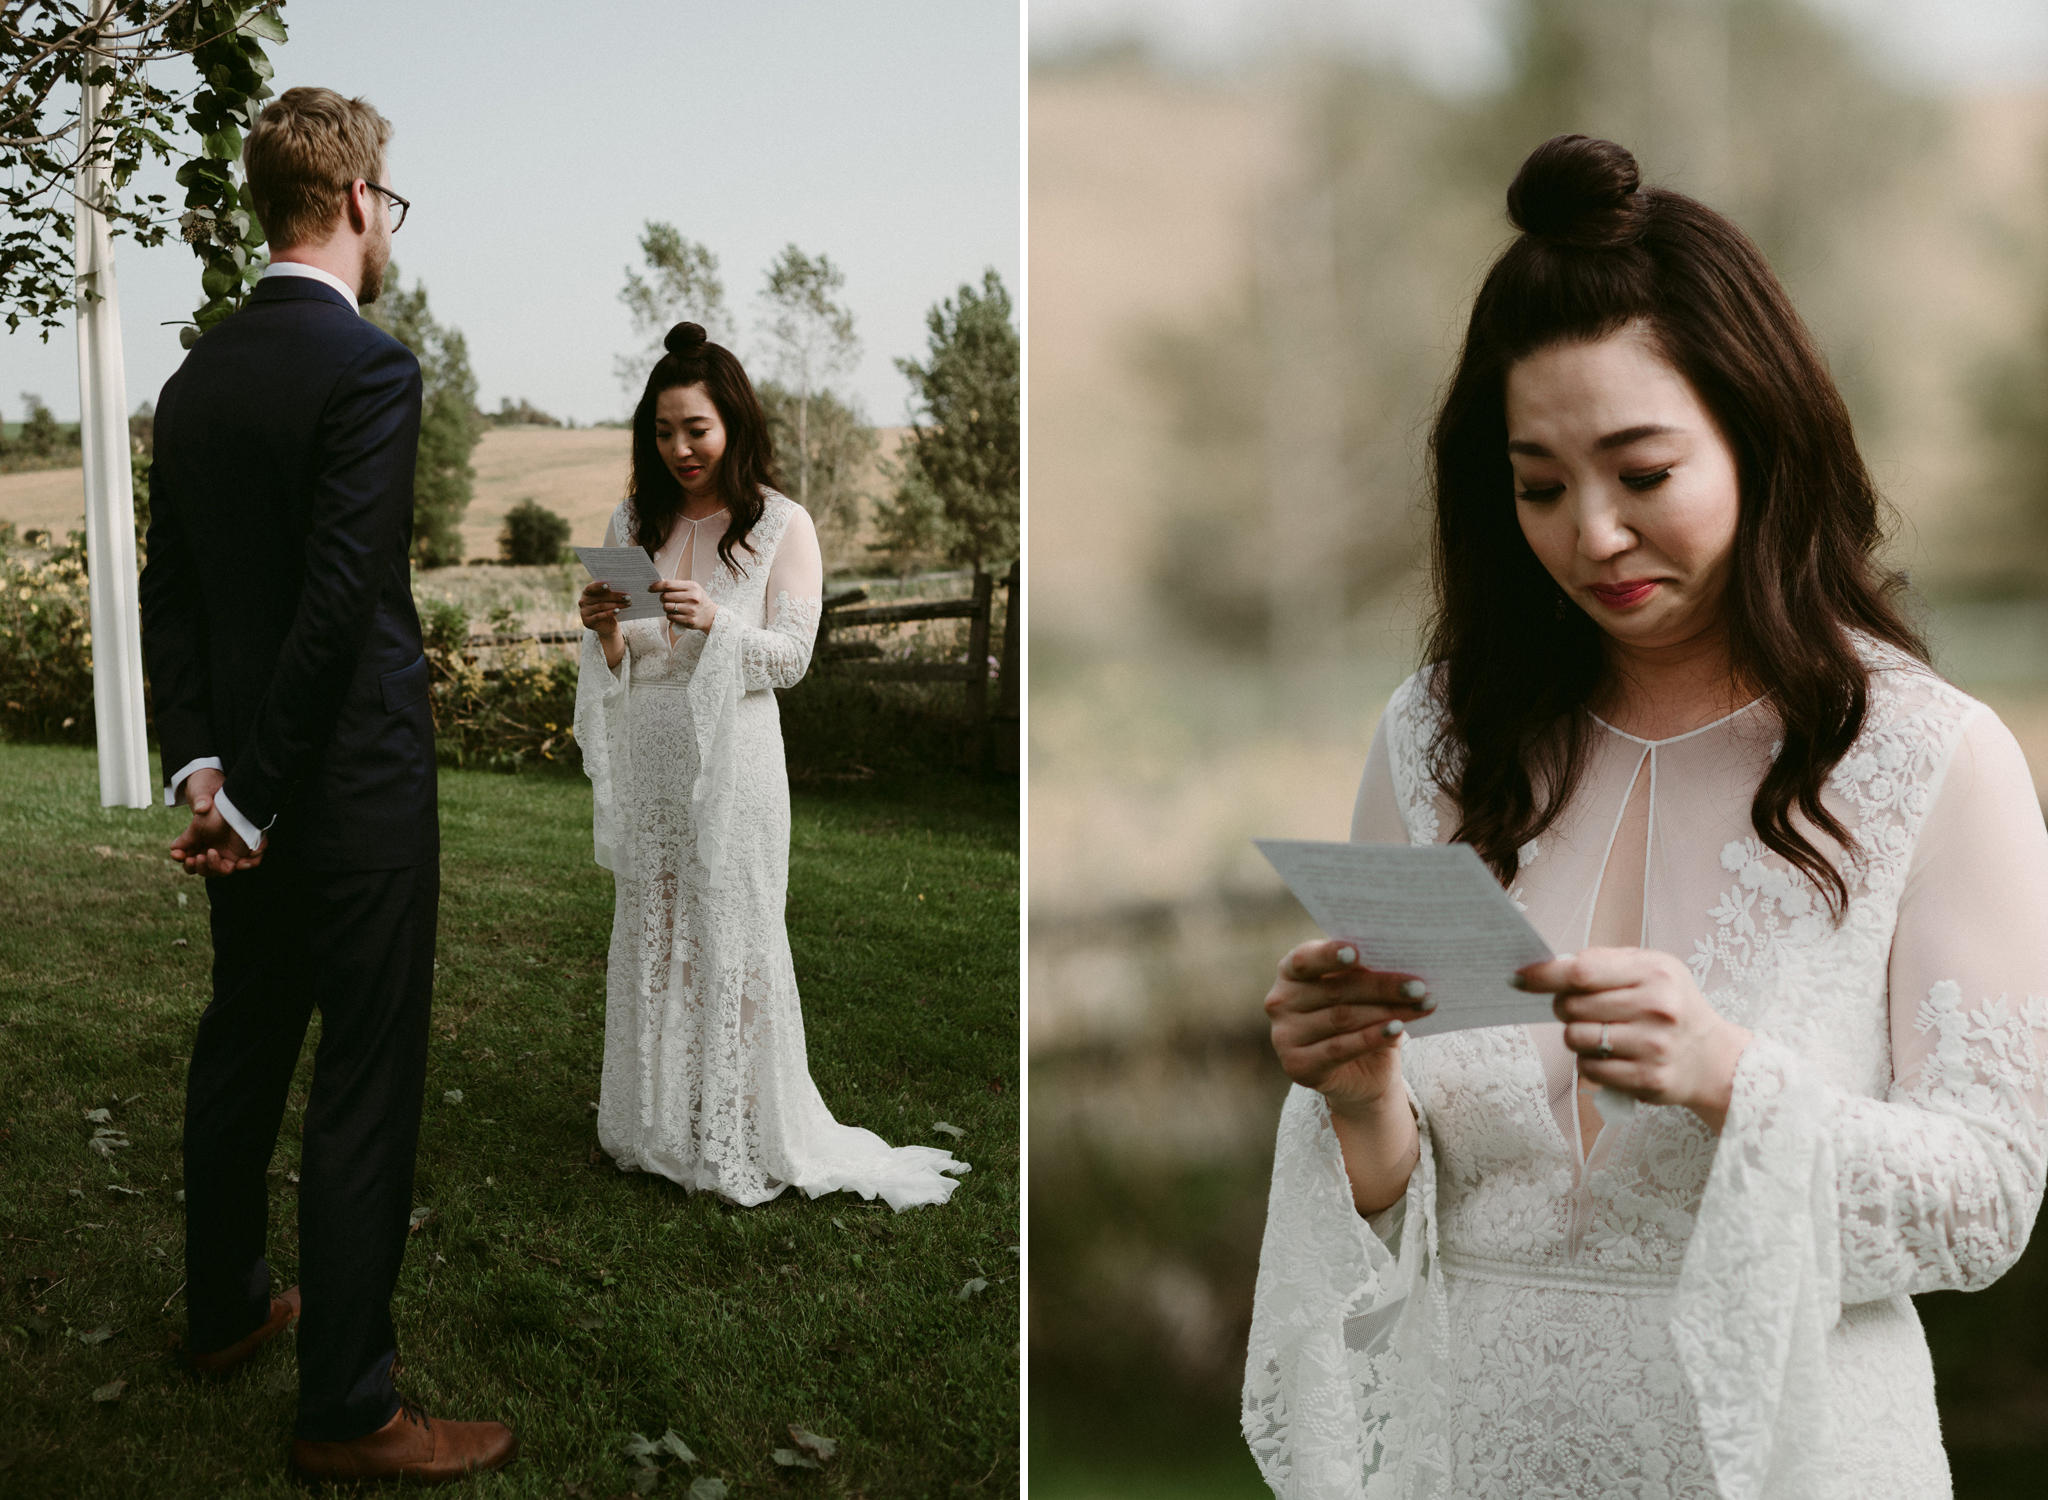 Emotional bride reading vows to groom in outdoor wedding ceremony